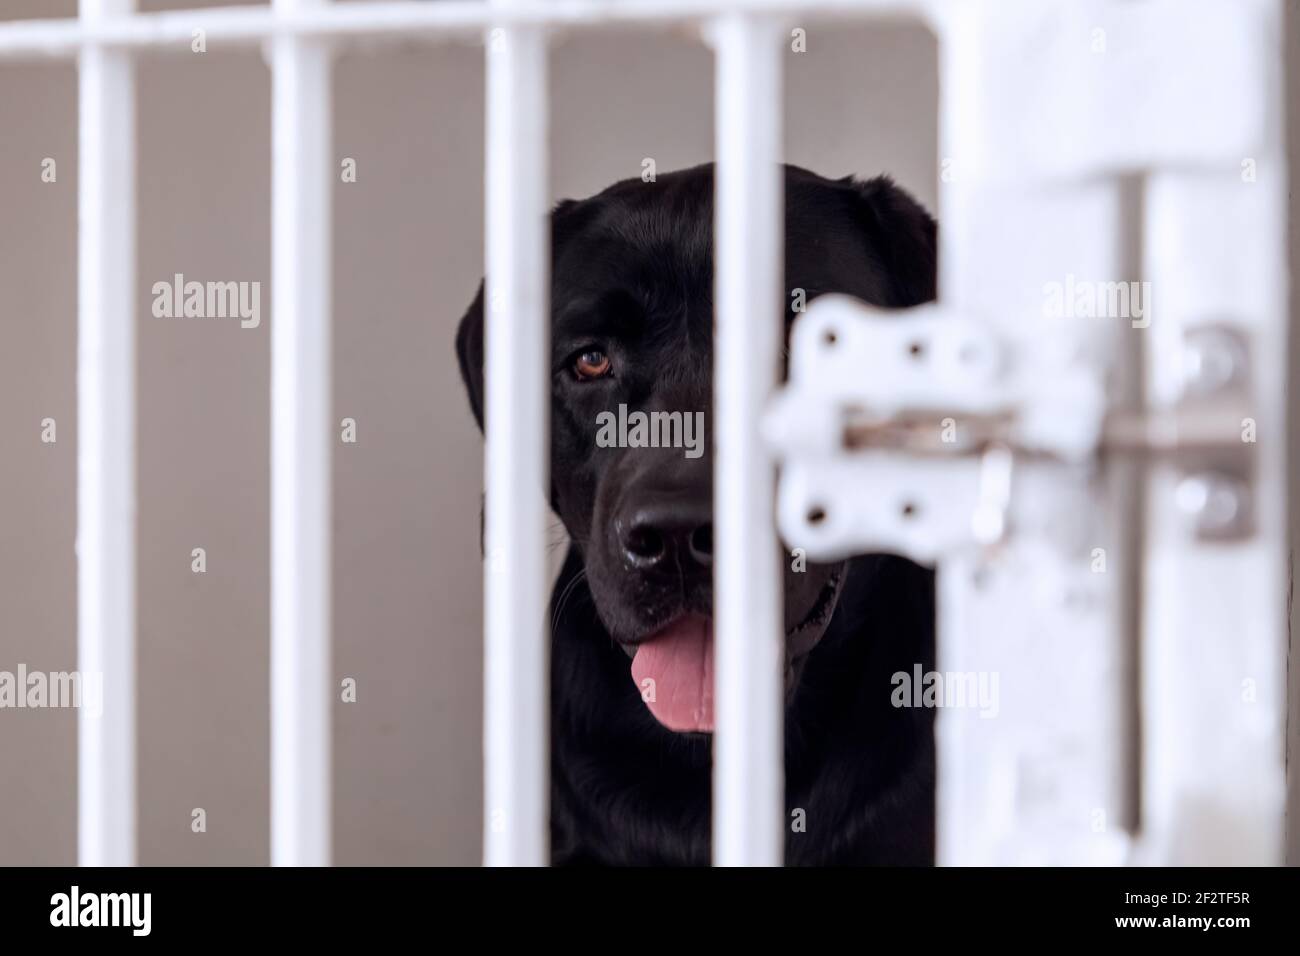 Unhappy and sad dog in a cage. Dog at an animal shelter looks through a cage. Dog behind bars in an animal shelter. Stock Photo